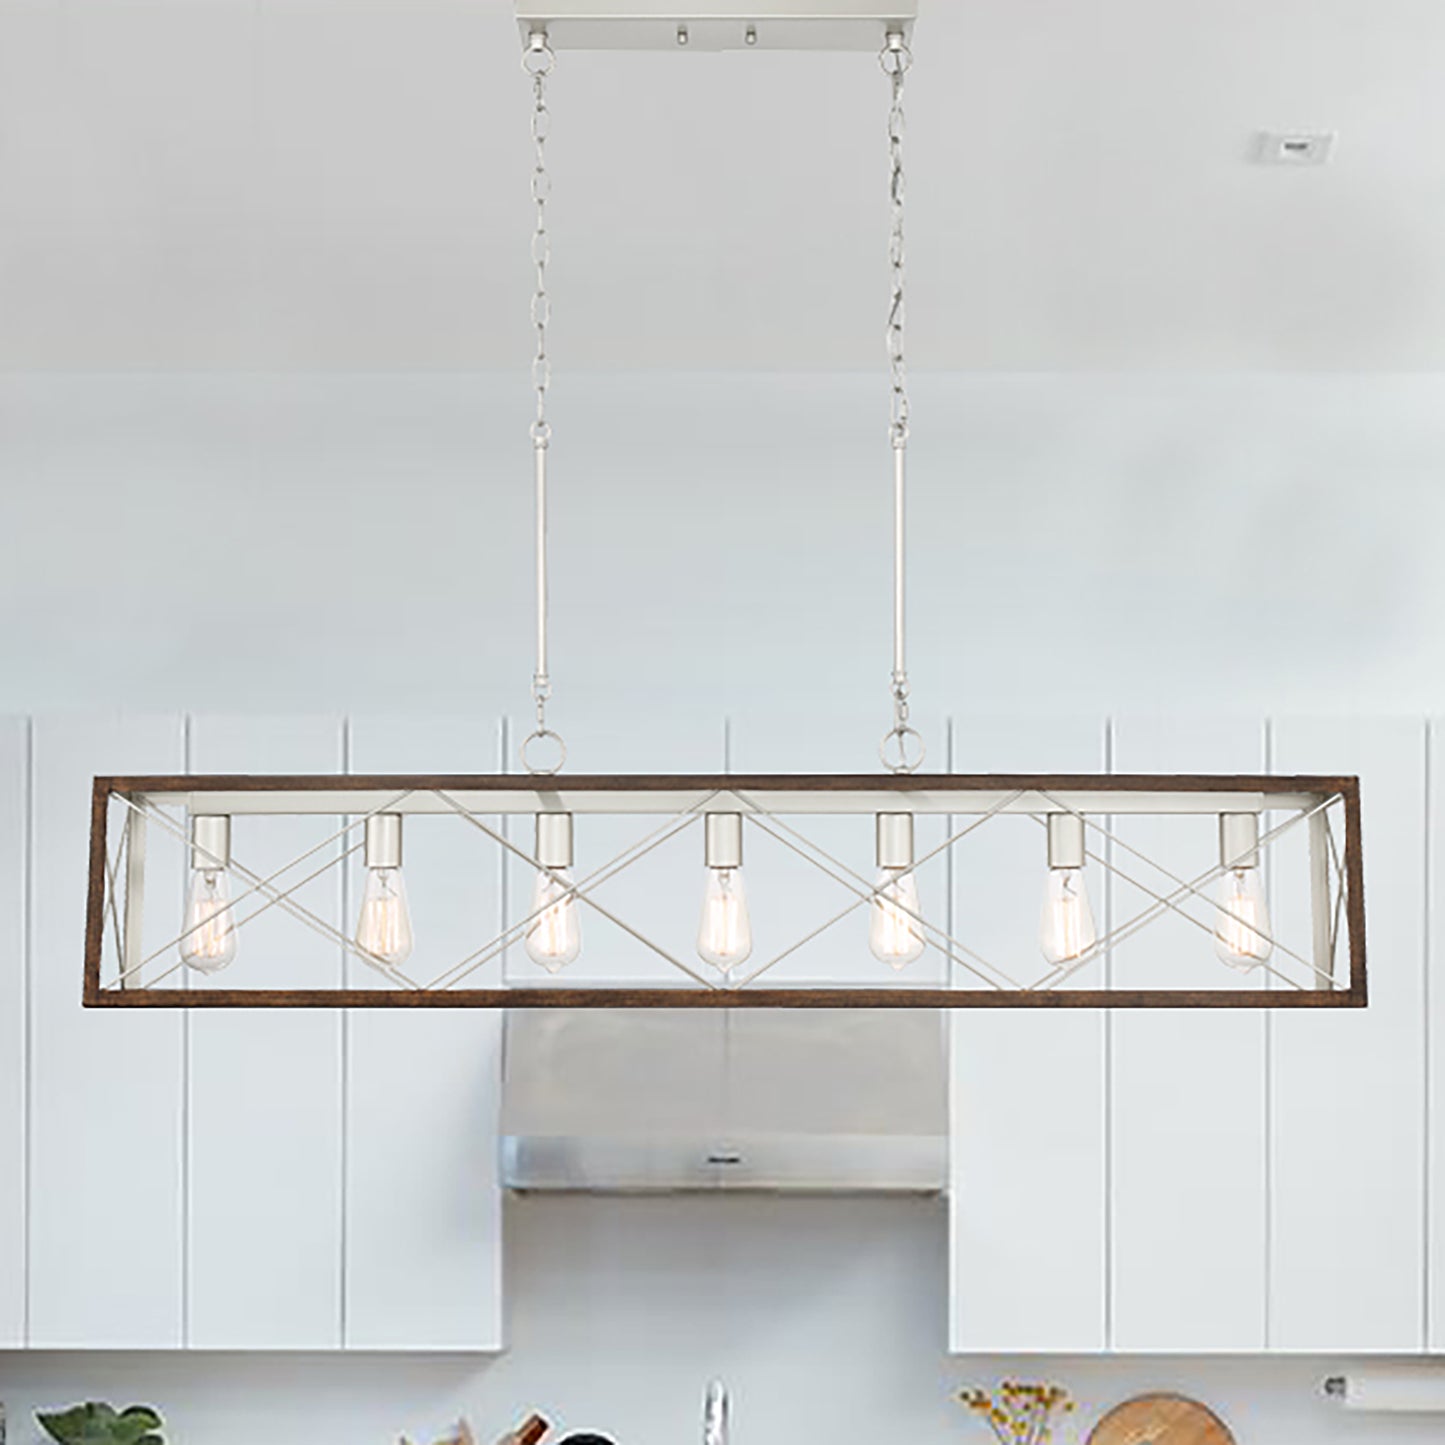 Alodie 7-Light Linear Rectangle Pendant UL Listed